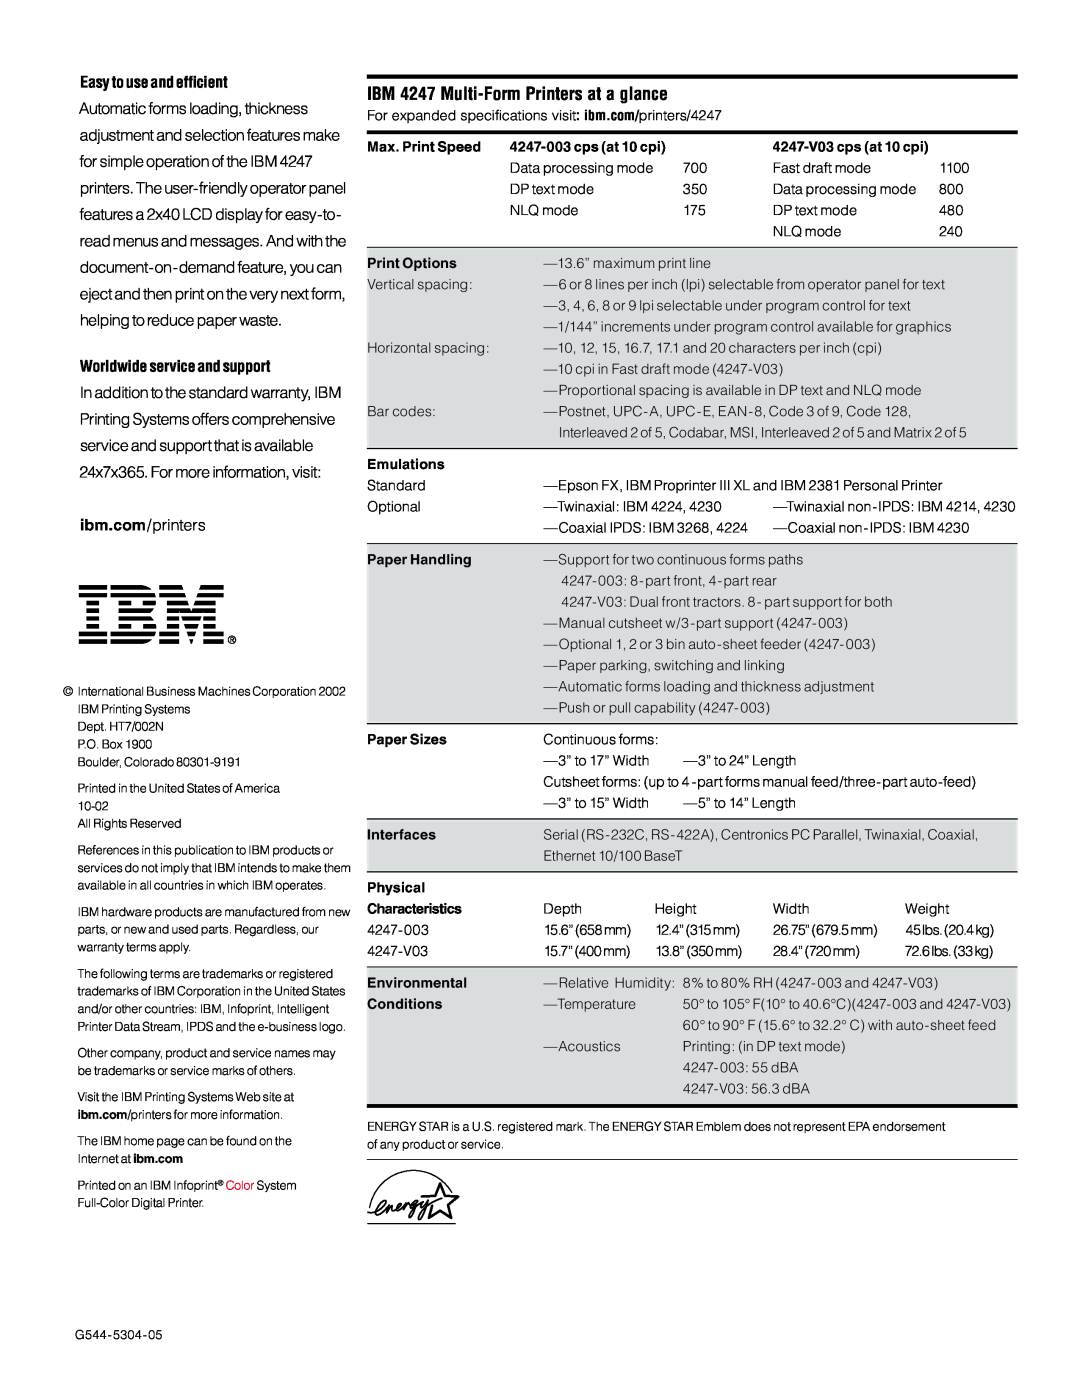 IBM 4247-003 IBM 4247 Multi-Form Printers at a glance, Easy to use and efficient, Worldwide service and support, printers 